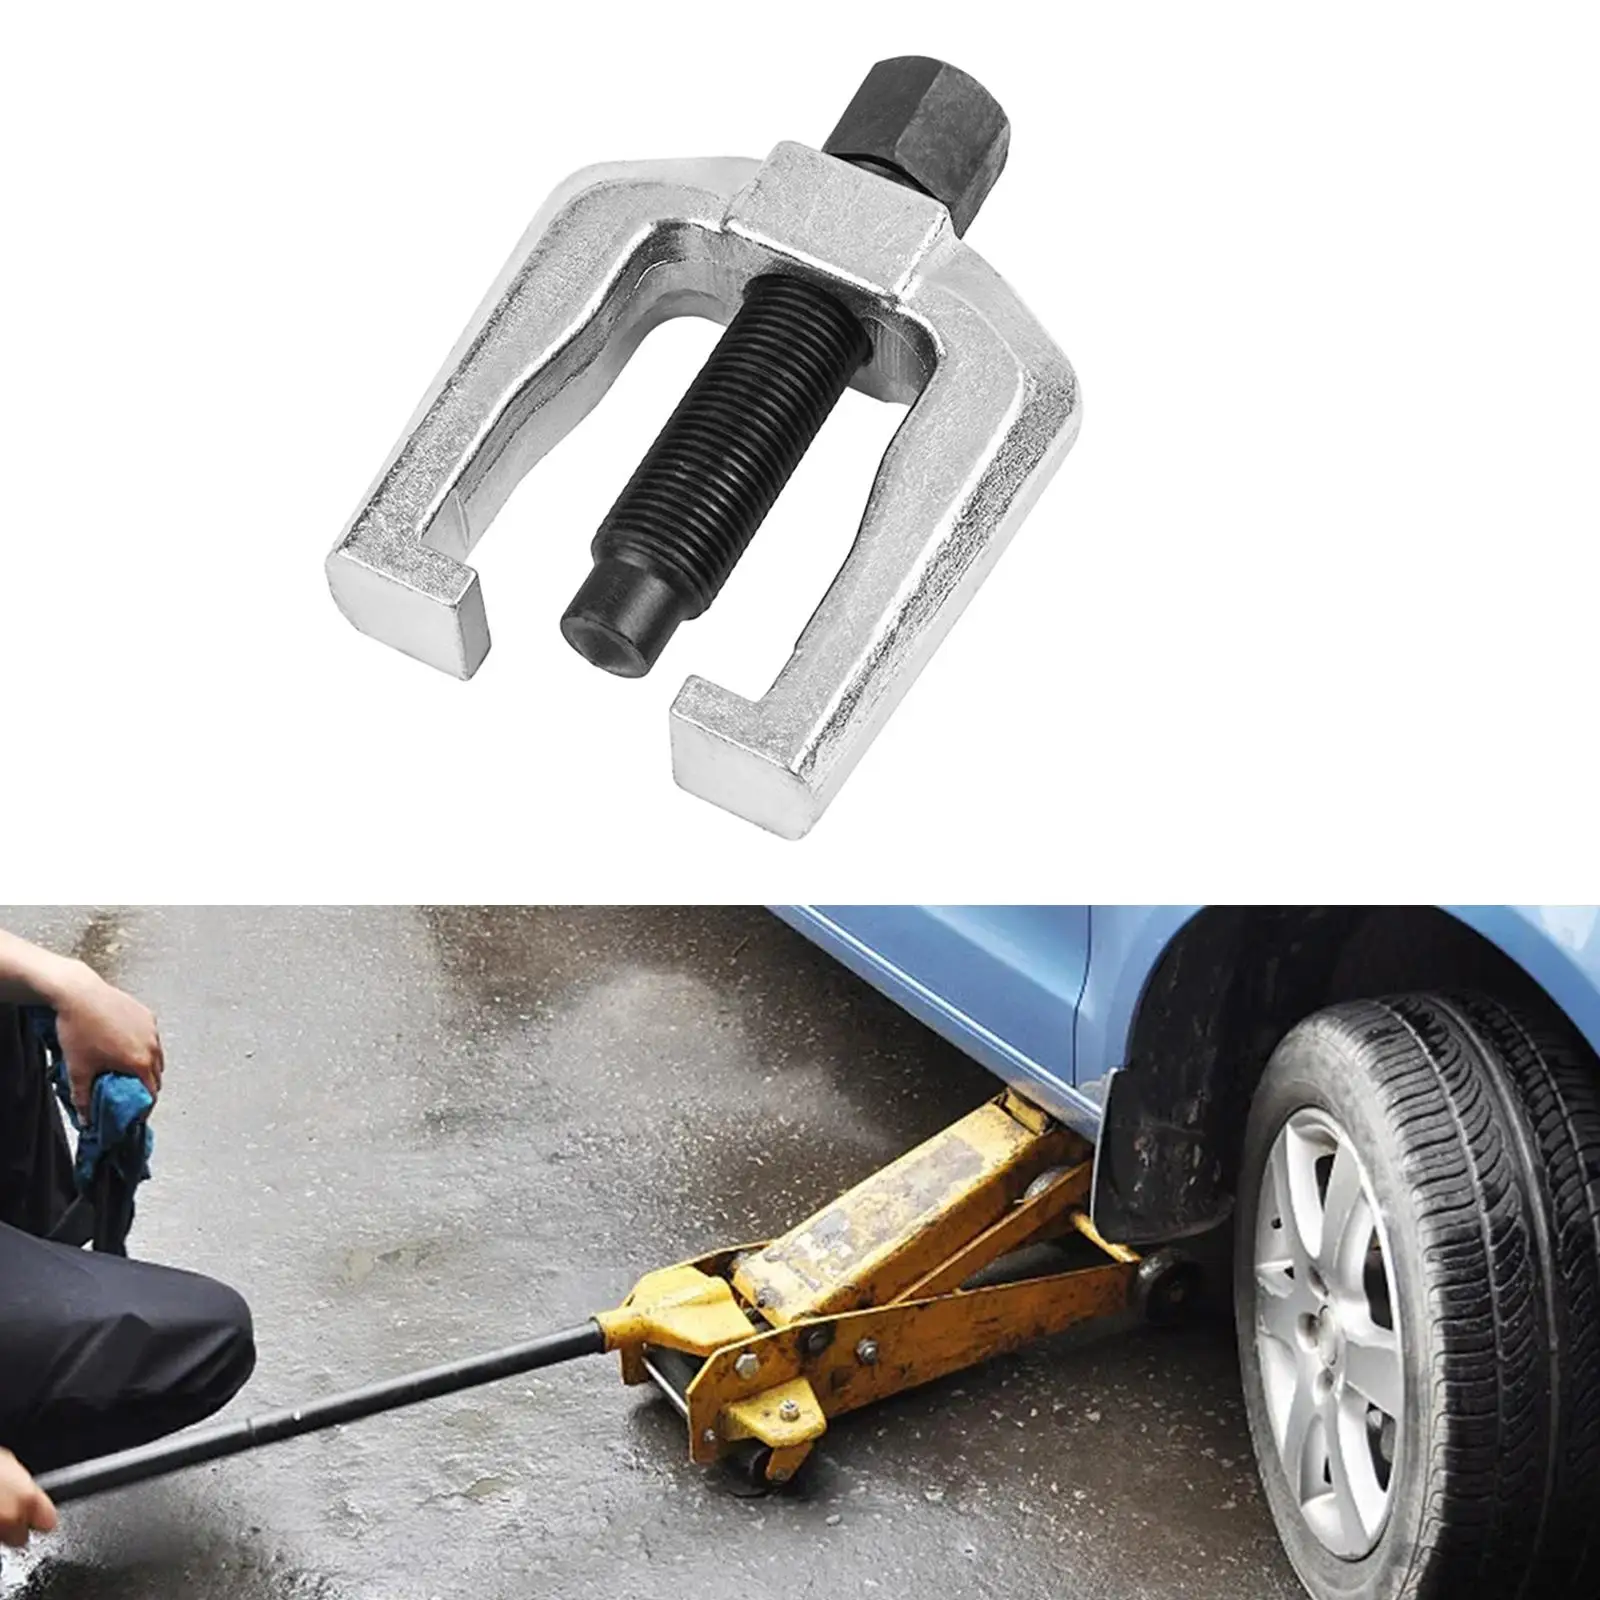 Slack Adjuster Puller Compact Easy to Operate Trucks Works on Automatic Adjusters Metal Sturdy Remover Tool Pulley Puller Tool